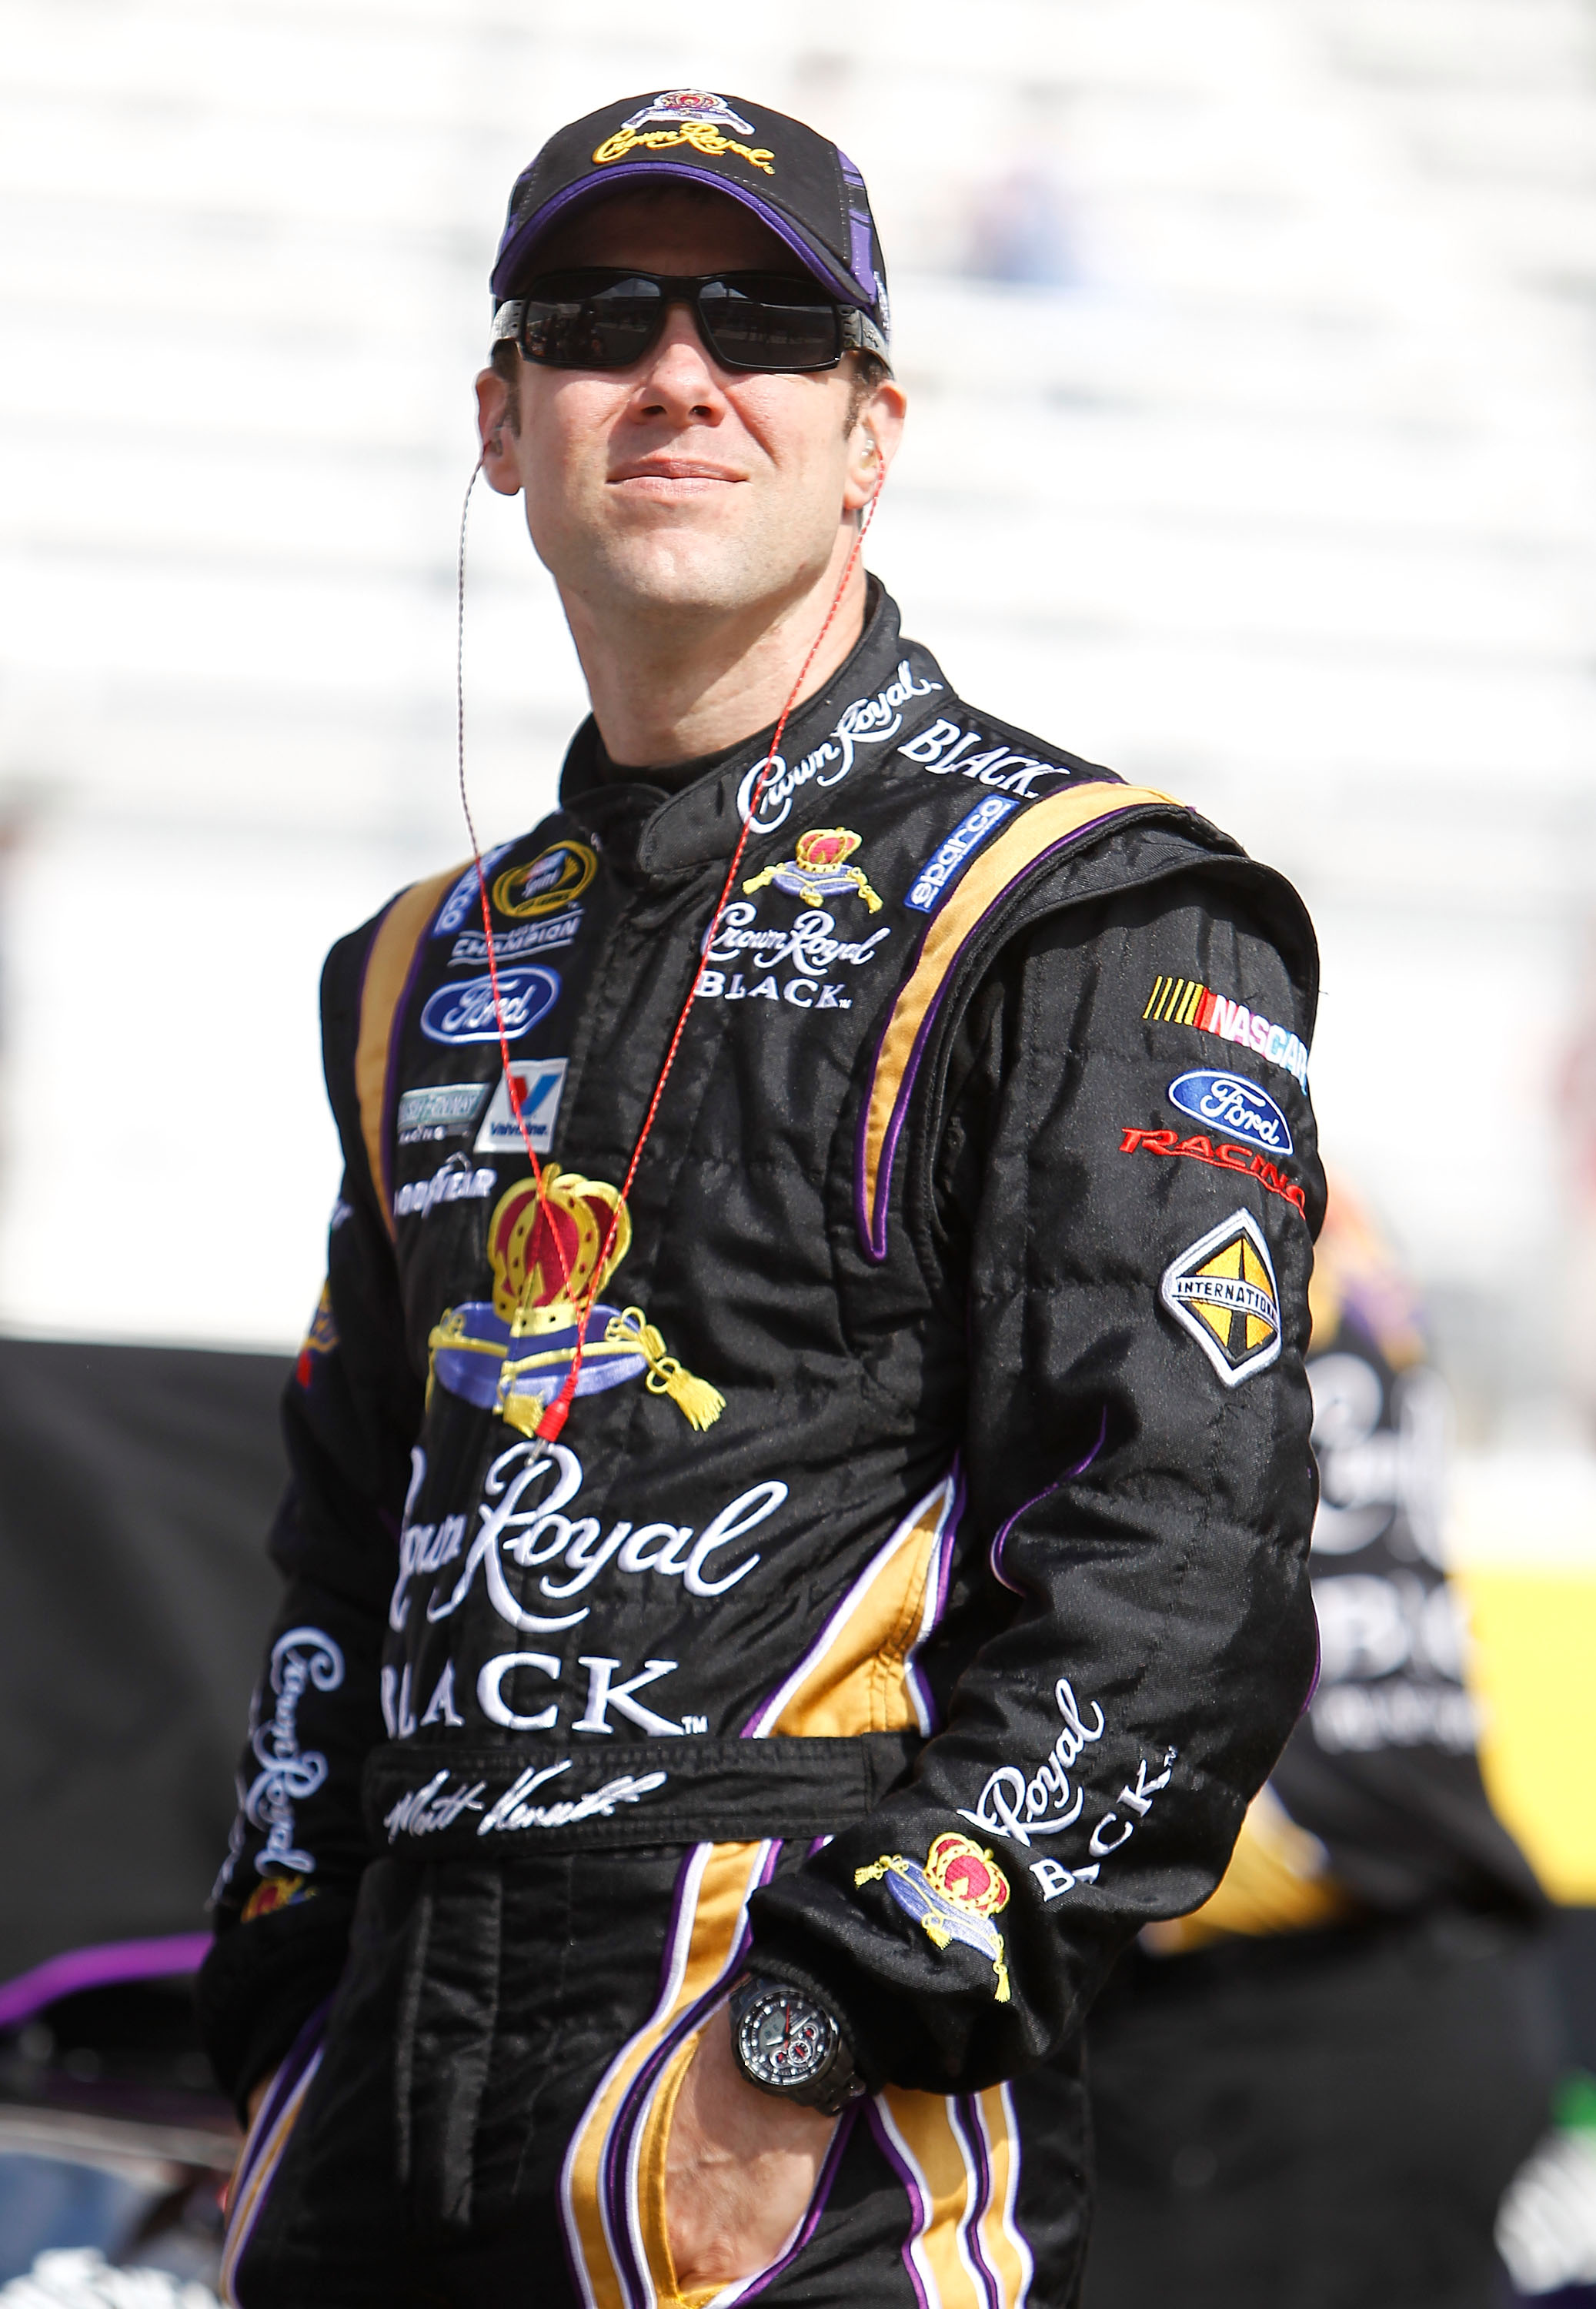 BRISTOL, TN - MARCH 18:  Matt Kenseth, driver of the #17 Crown Royal Black Ford, stands on the grid during qualifying for the NASCAR Sprint Cup Series Jeff Byrd 500 Presented By Food City at Bristol Motor Speedway on March 18, 2011 in Bristol, Tennessee.